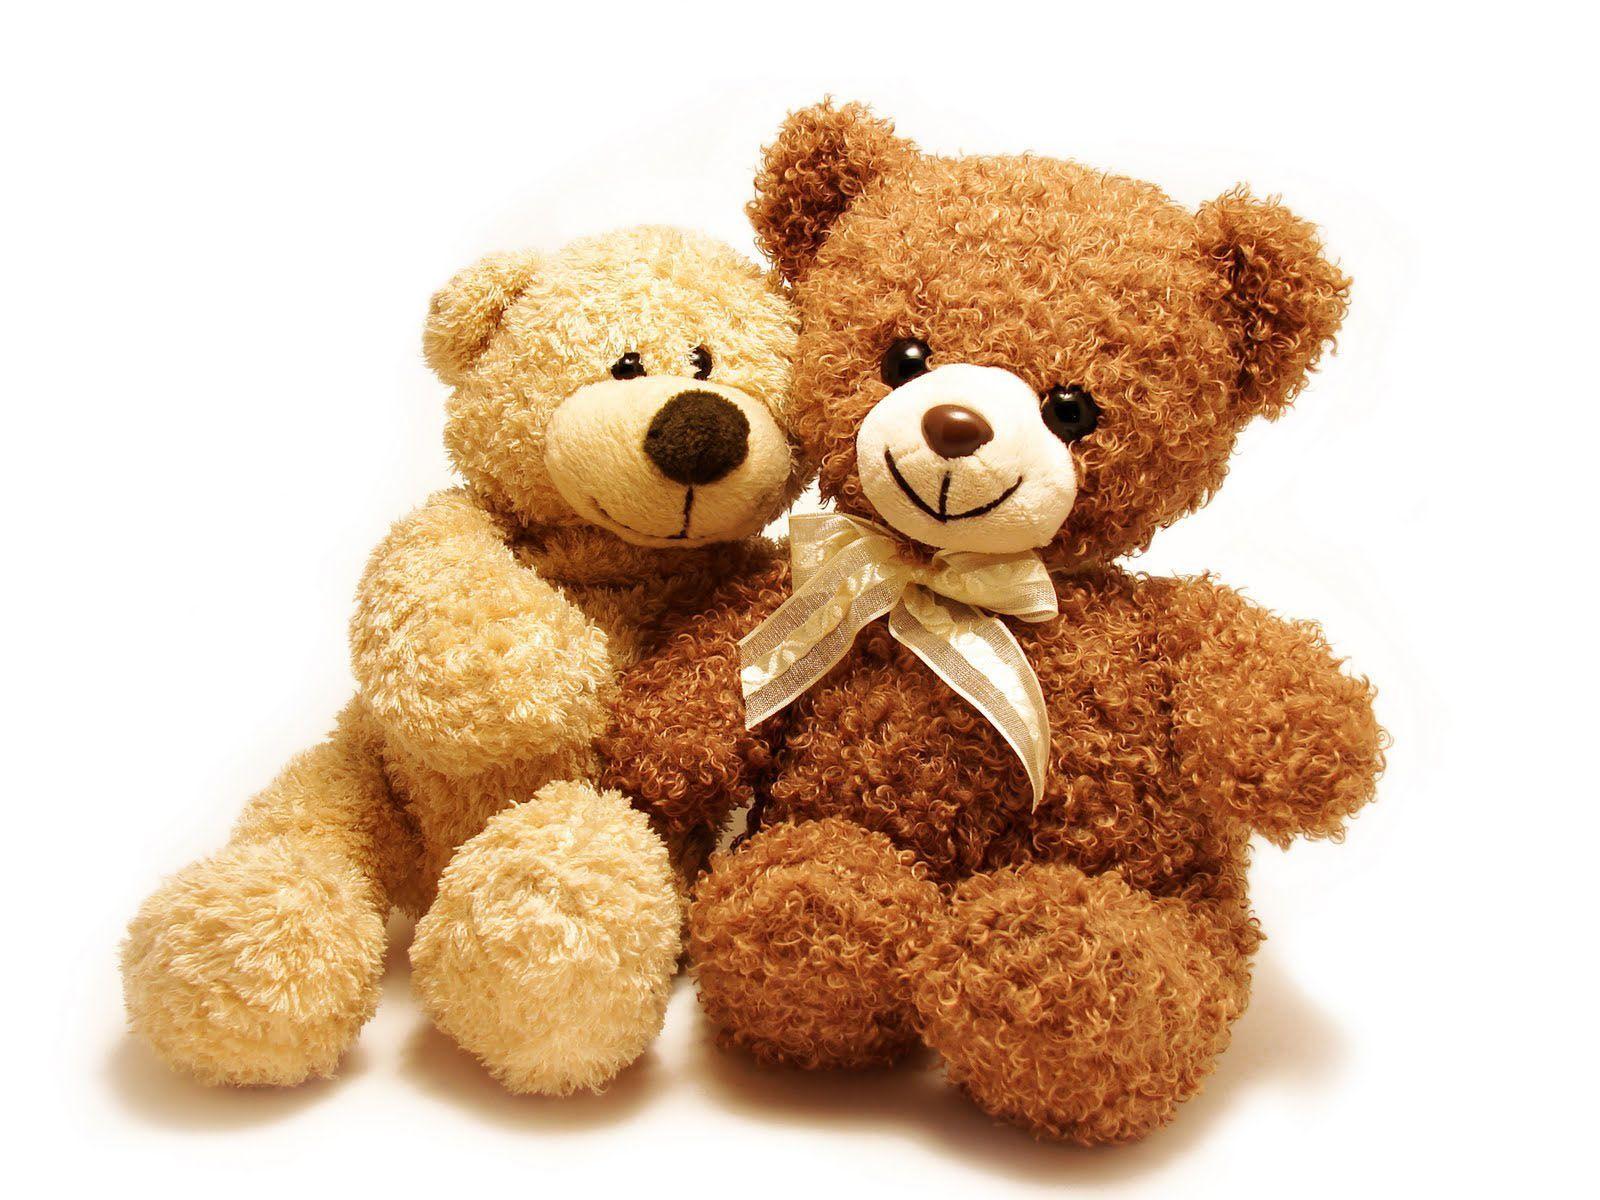 Free download Cute Teddy Bear Wallpapers [1600x1200] for your Desktop